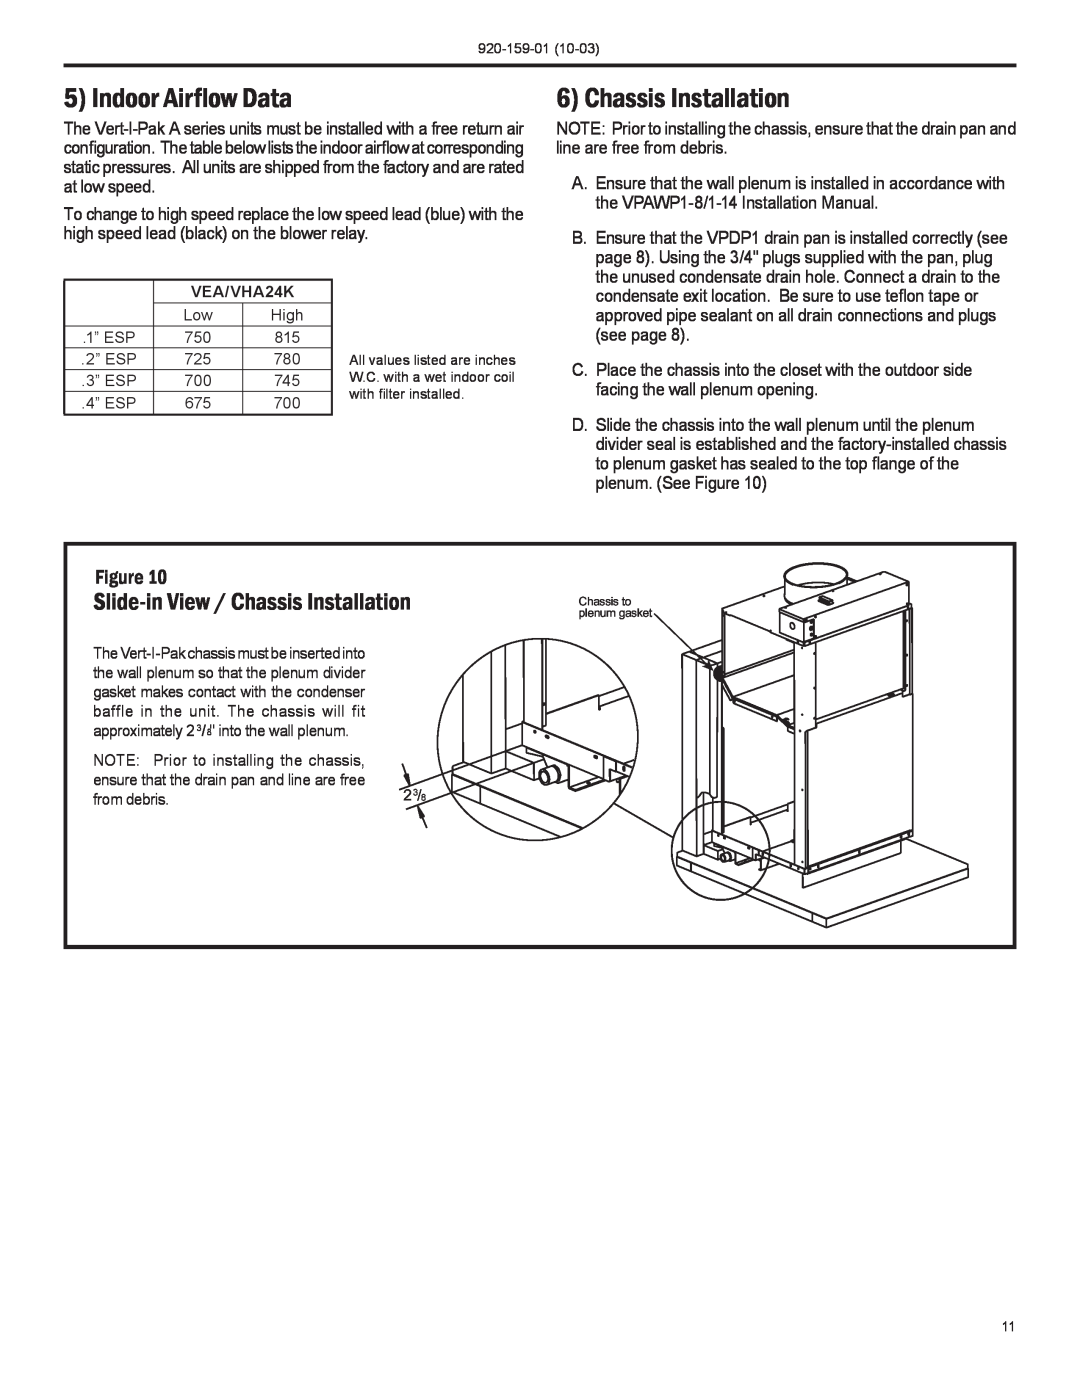 Friedrich 920-159-01 (10-03) operation manual Indoor Airflow Data, Slide-inView / Chassis Installation 